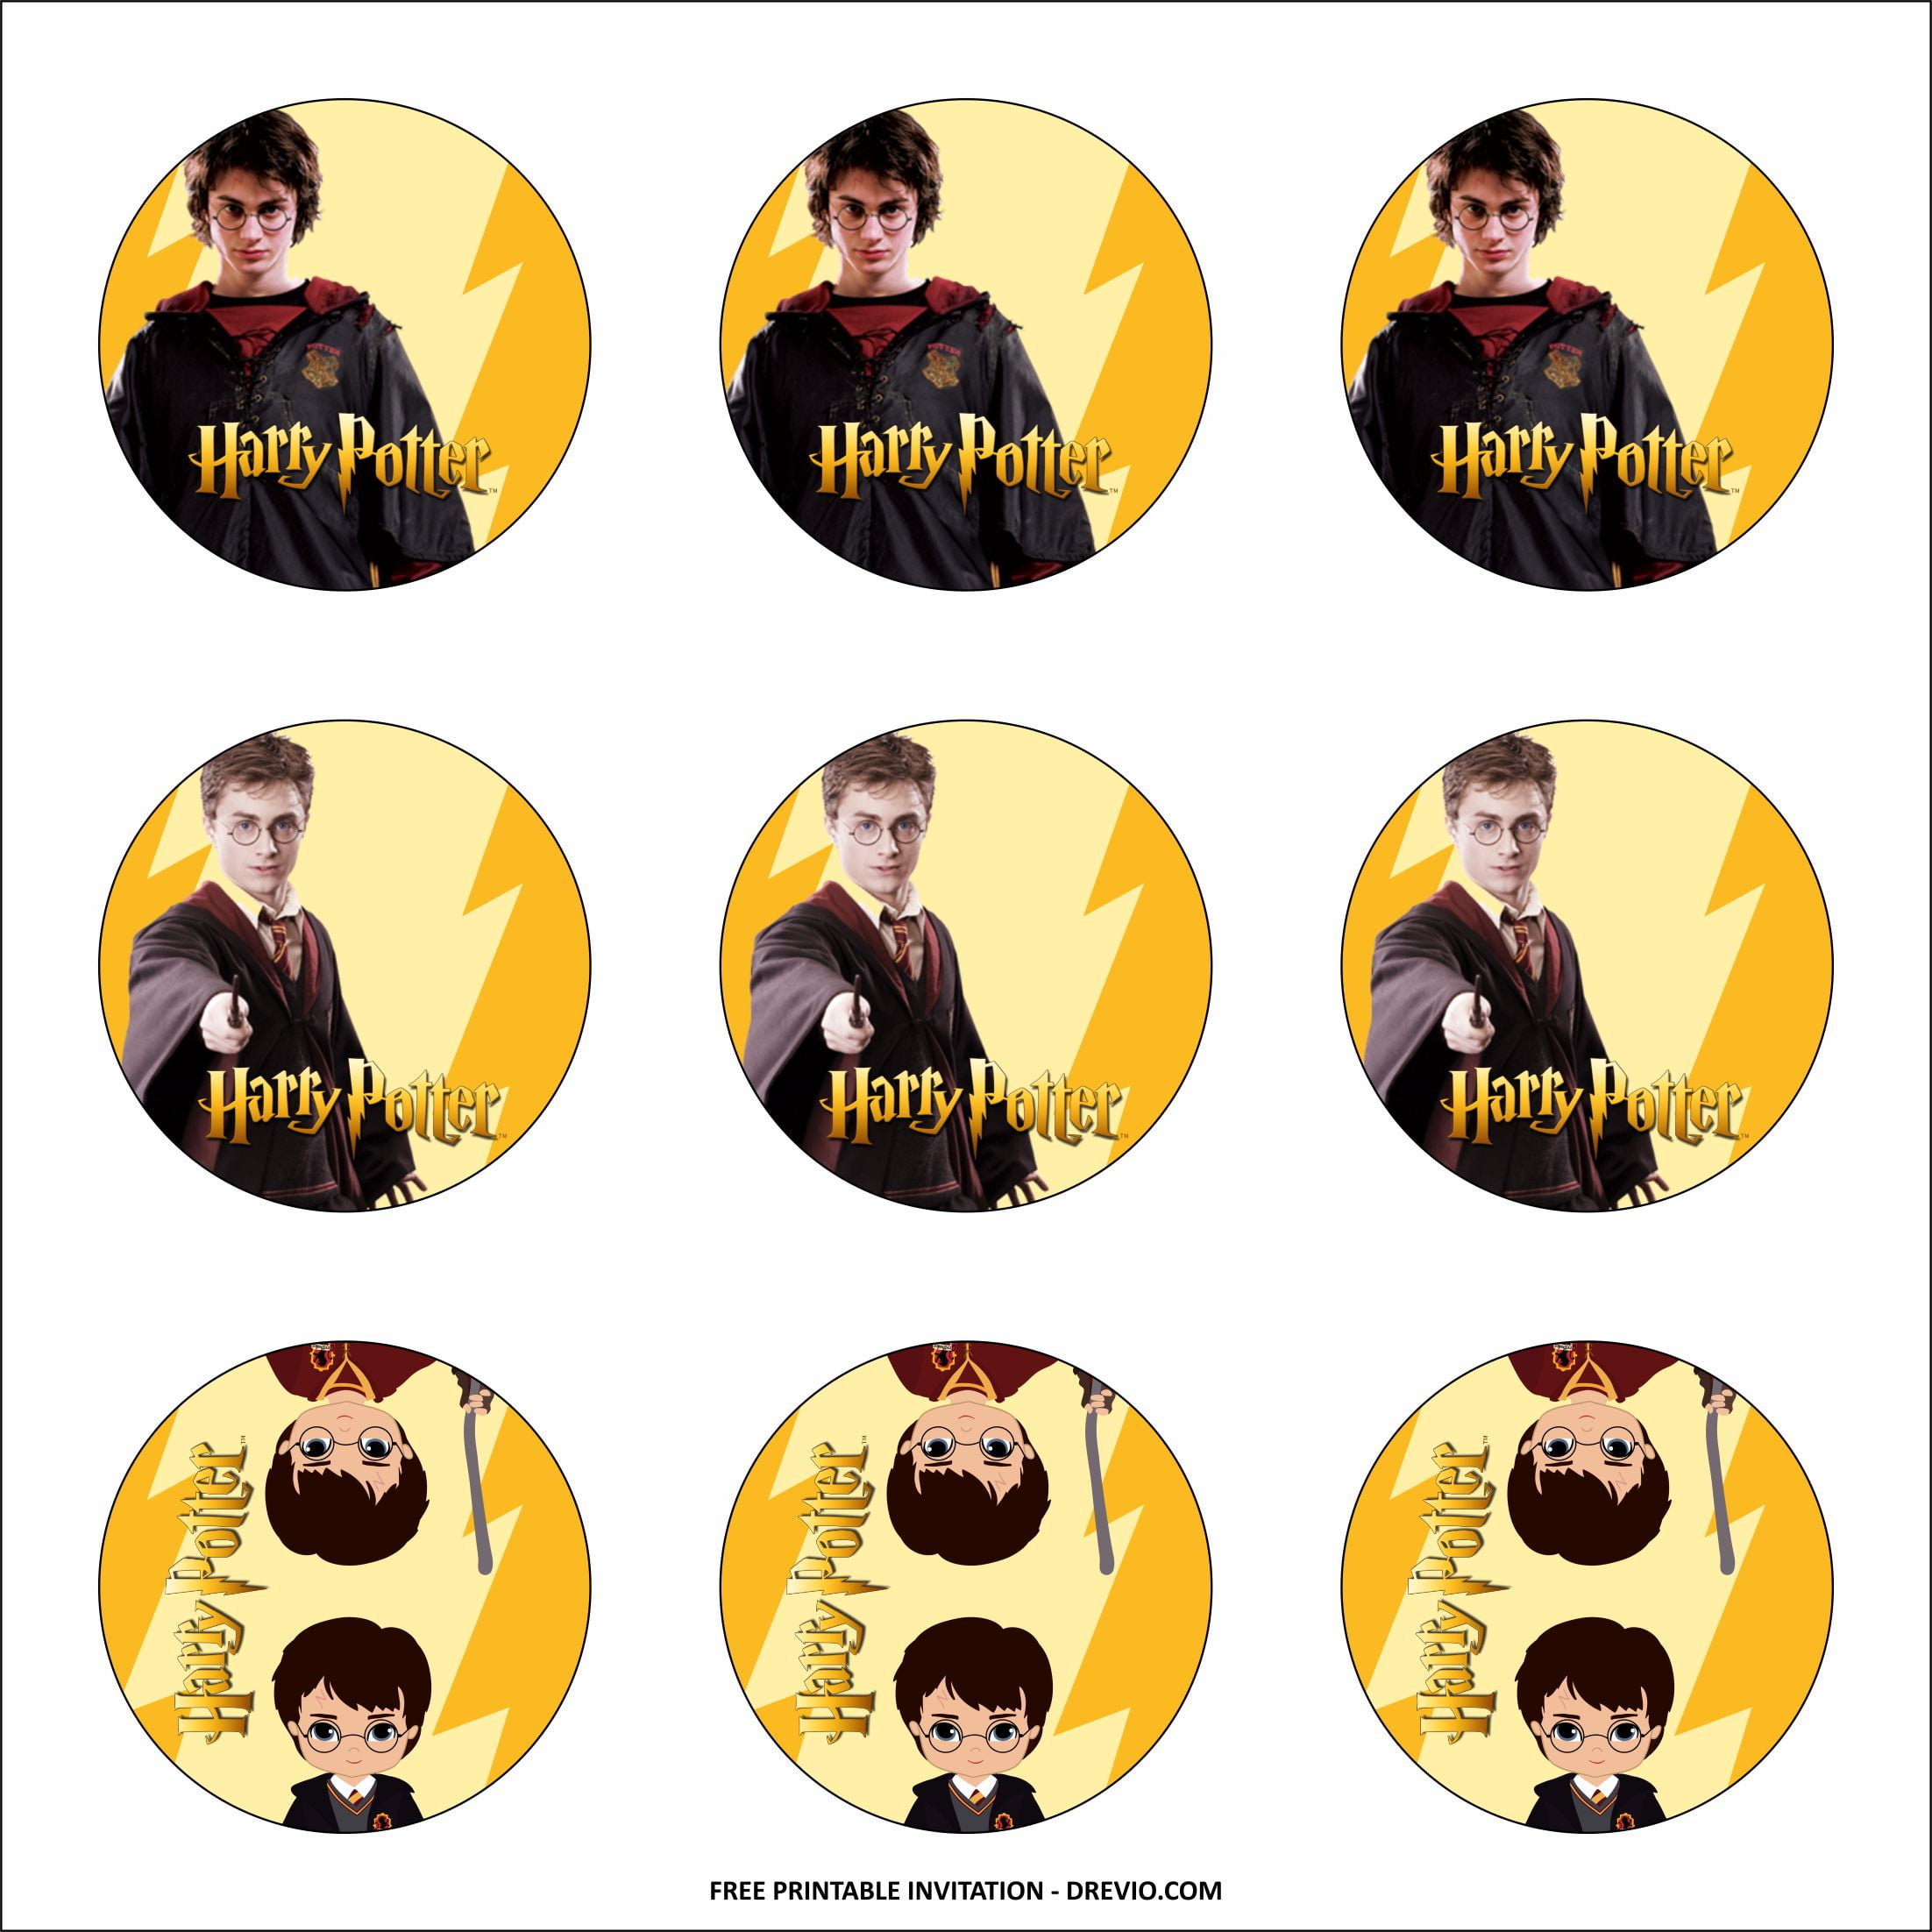 Cartoon Harry Potter: Free Printable Cake Toppers - Oh My Fiesta! for Geeks